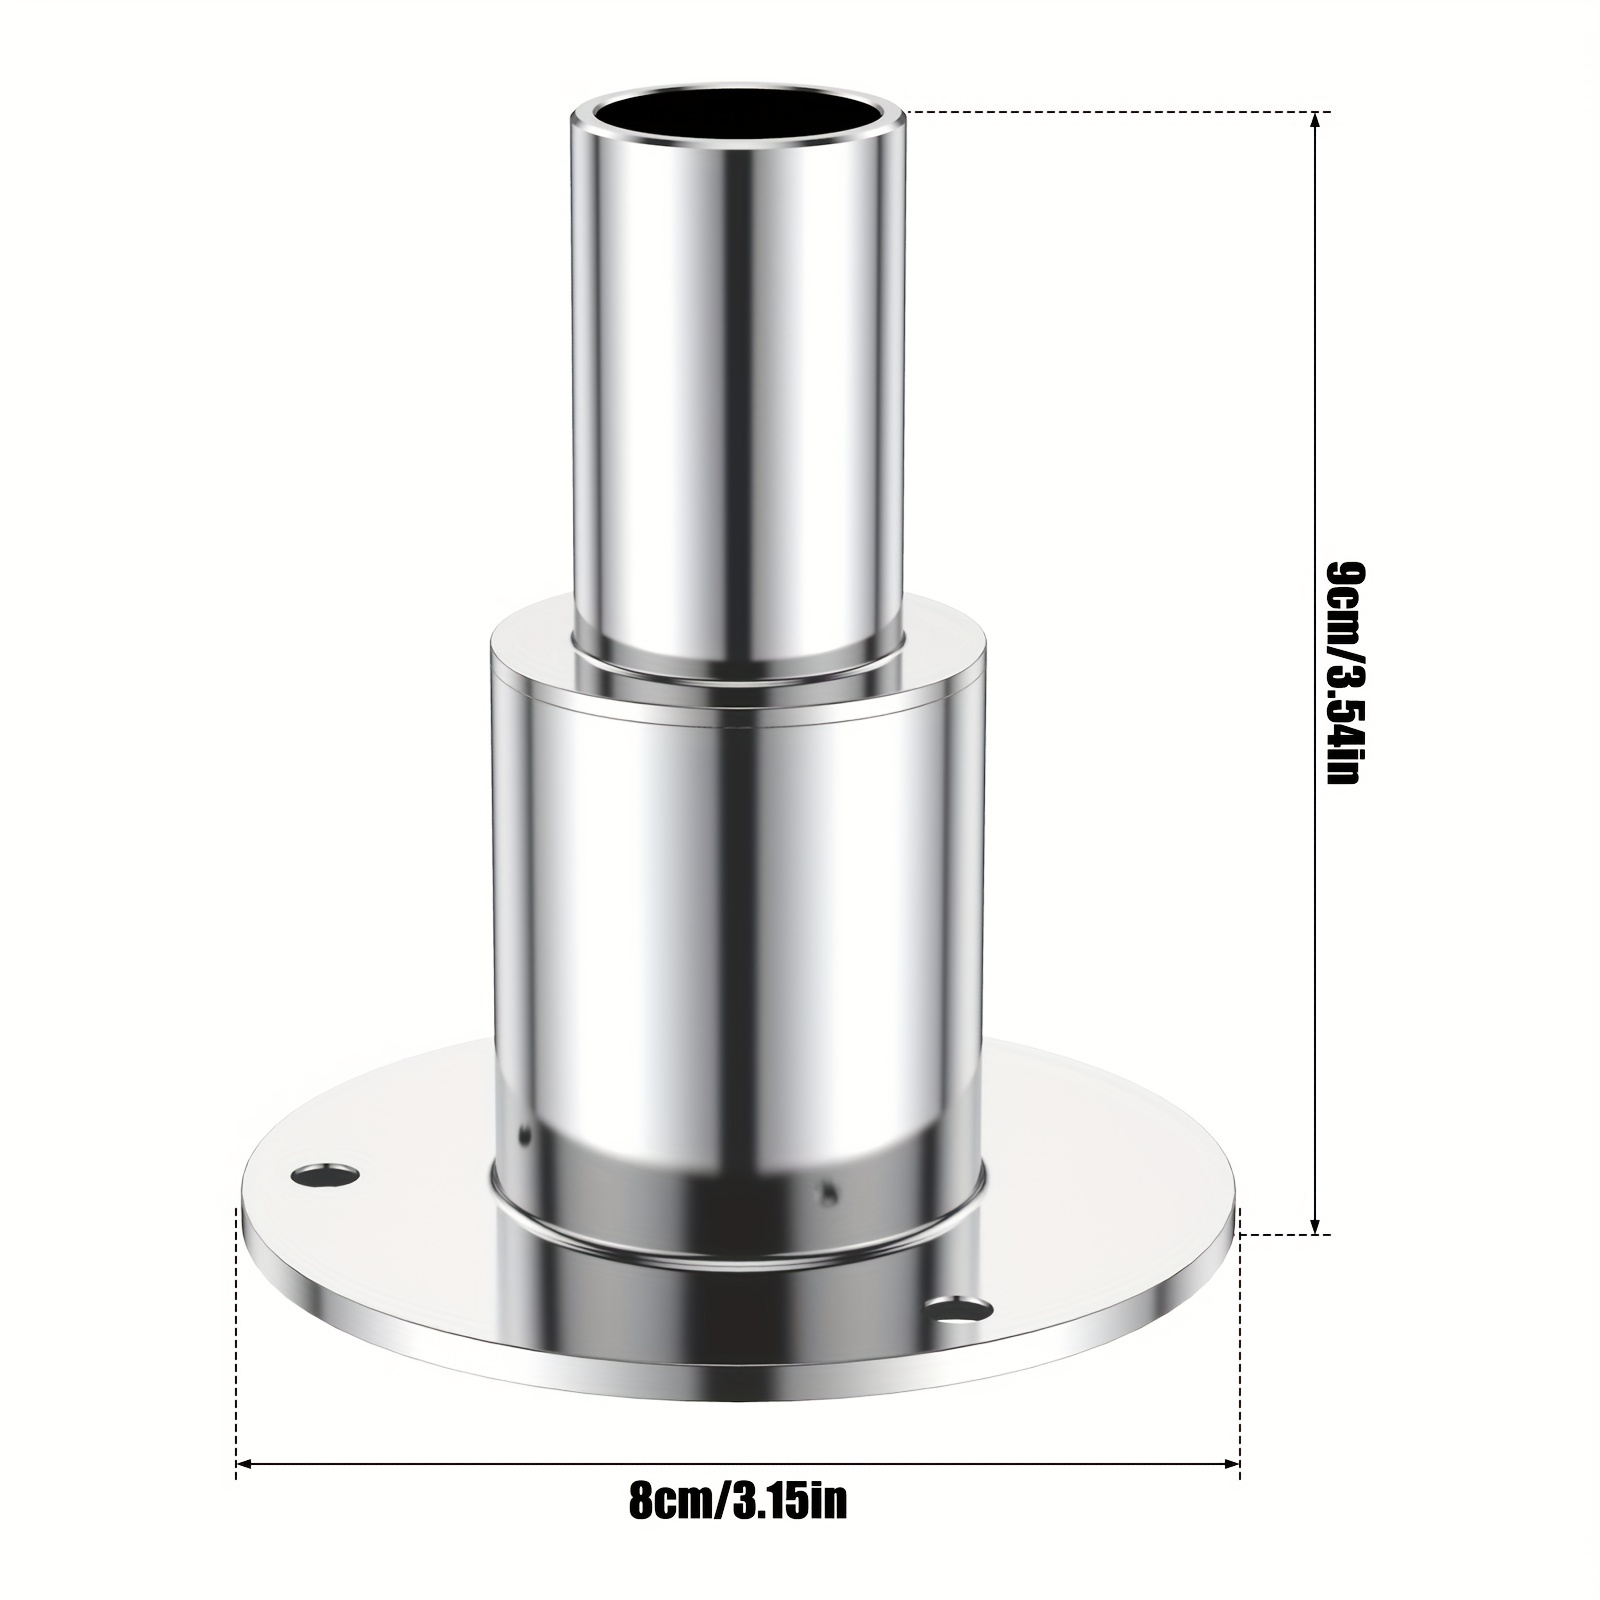 Beach Accessories Thru Hull 316 Stainless Steel Exhaust Fitting Fit For 24mm  Inner Diameter Hose Pipe With Bolts And Nuts 230626 From Bong07, $40.56